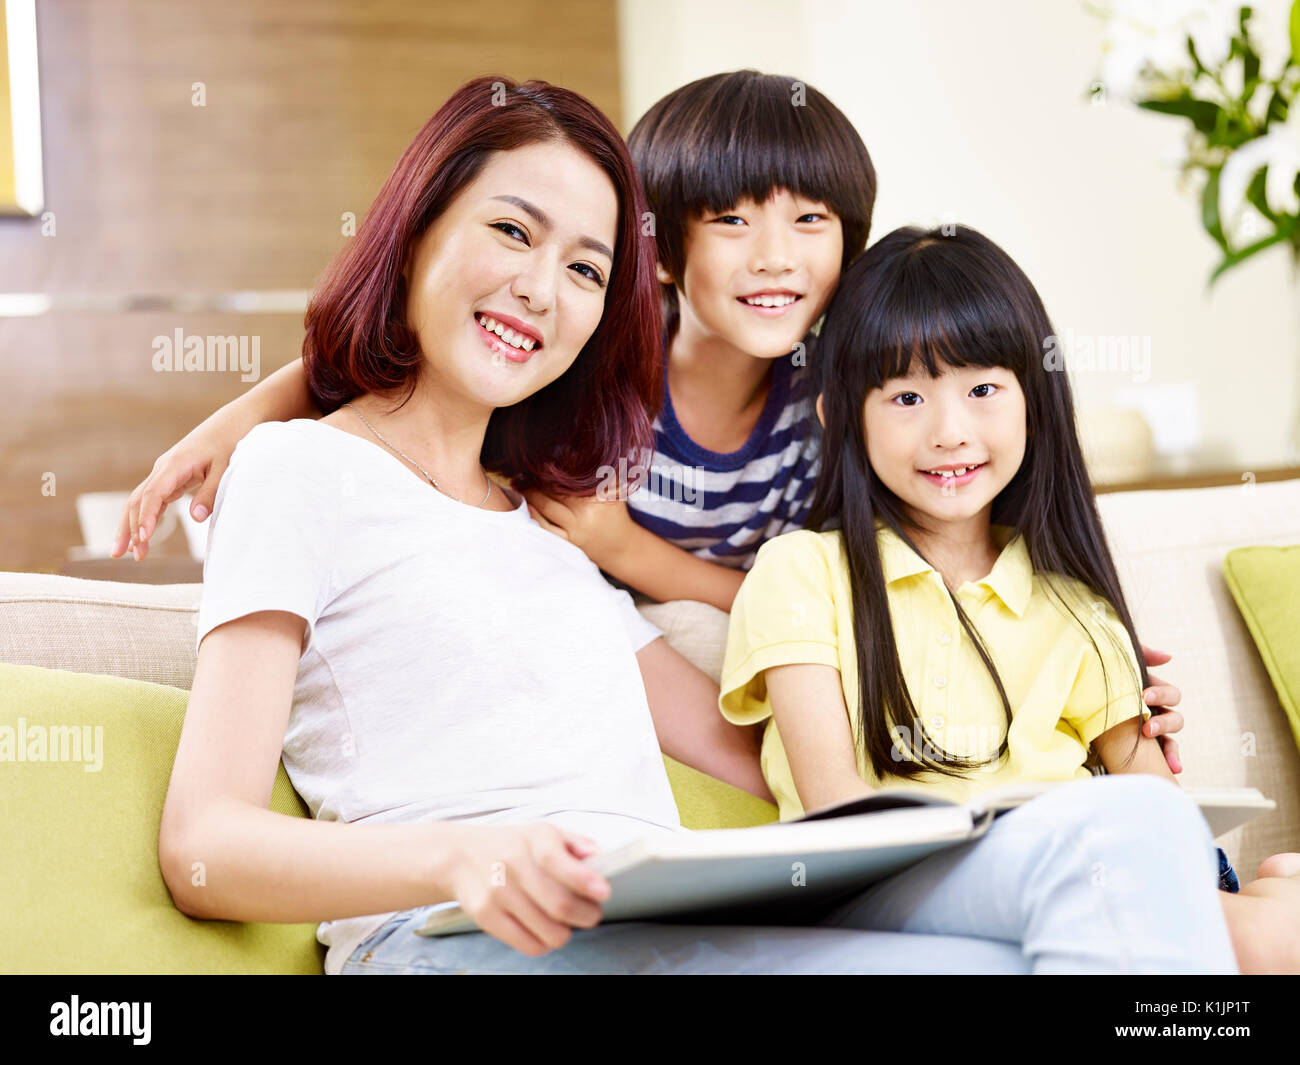 asian mother and two children sitting on couch reading a book. Stock Photo